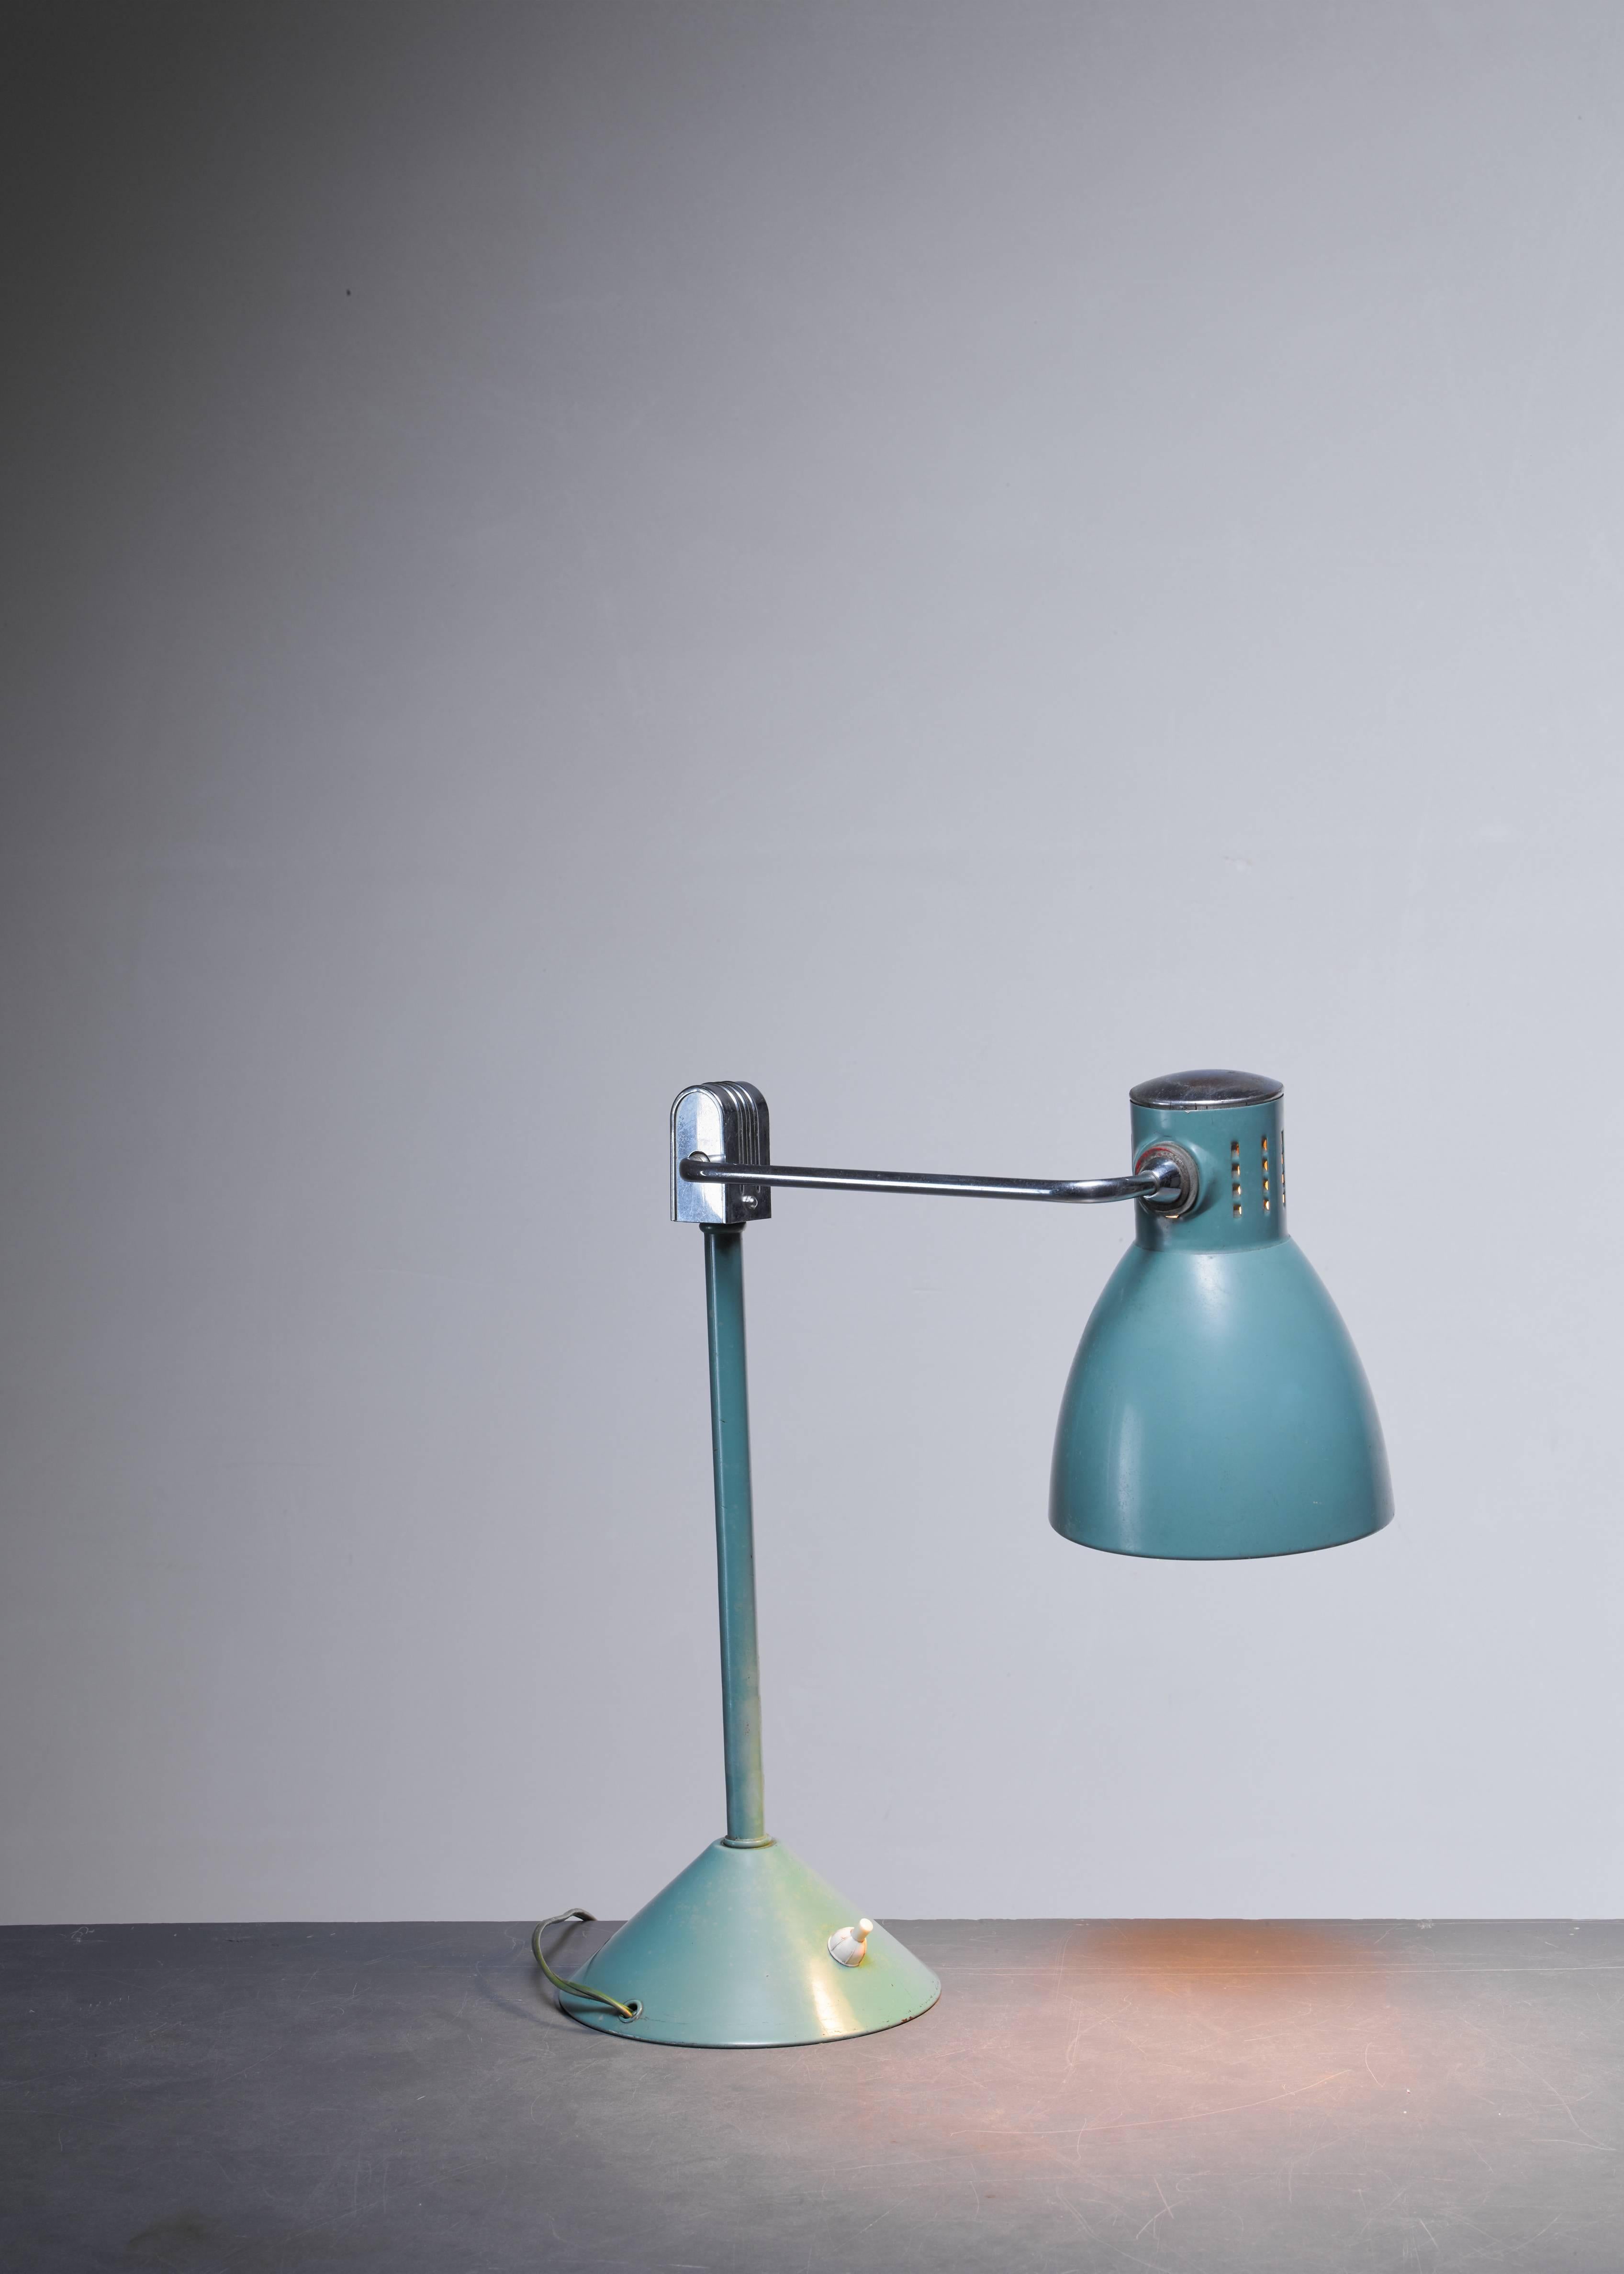 Metal Green Jumo Table Lamp, France, 1940s For Sale